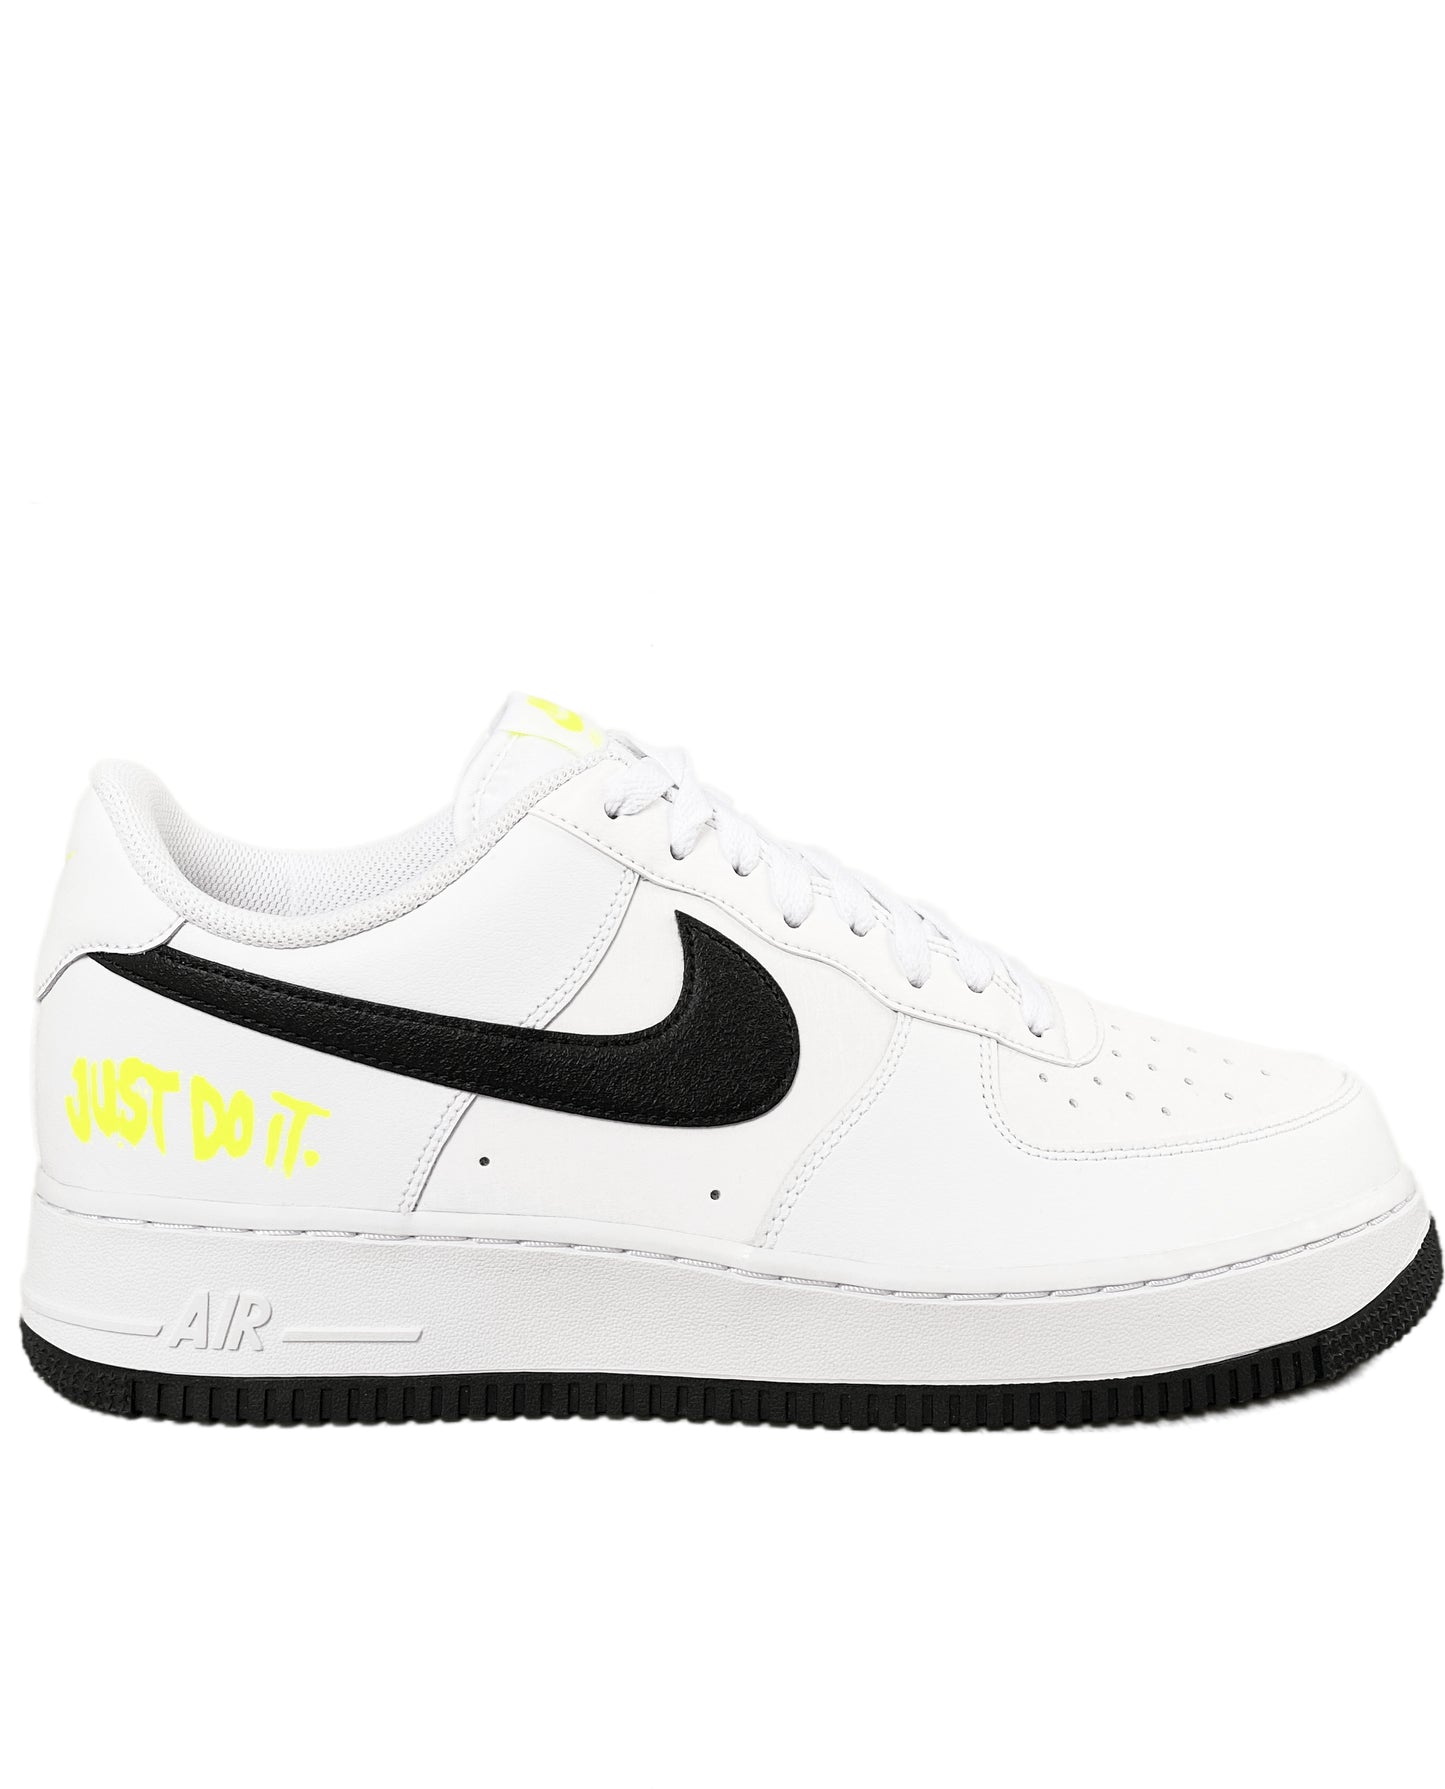 NIKE AIR FORCE 1 LOW "JUST DO IT"